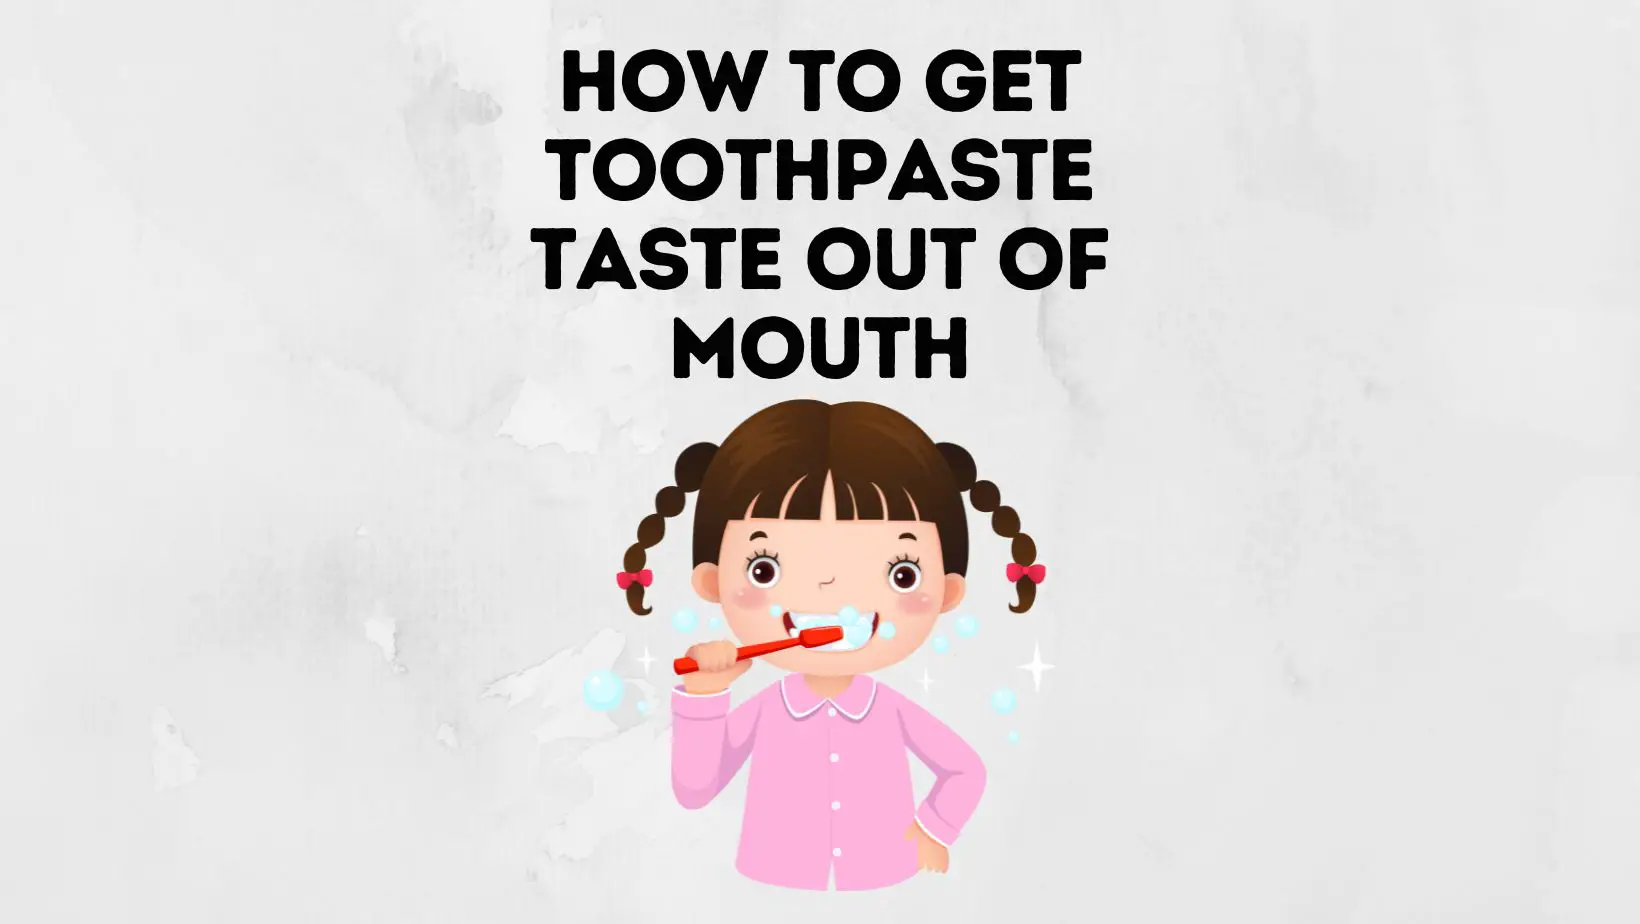 How To Get Toothpaste Taste Out Of Mouth